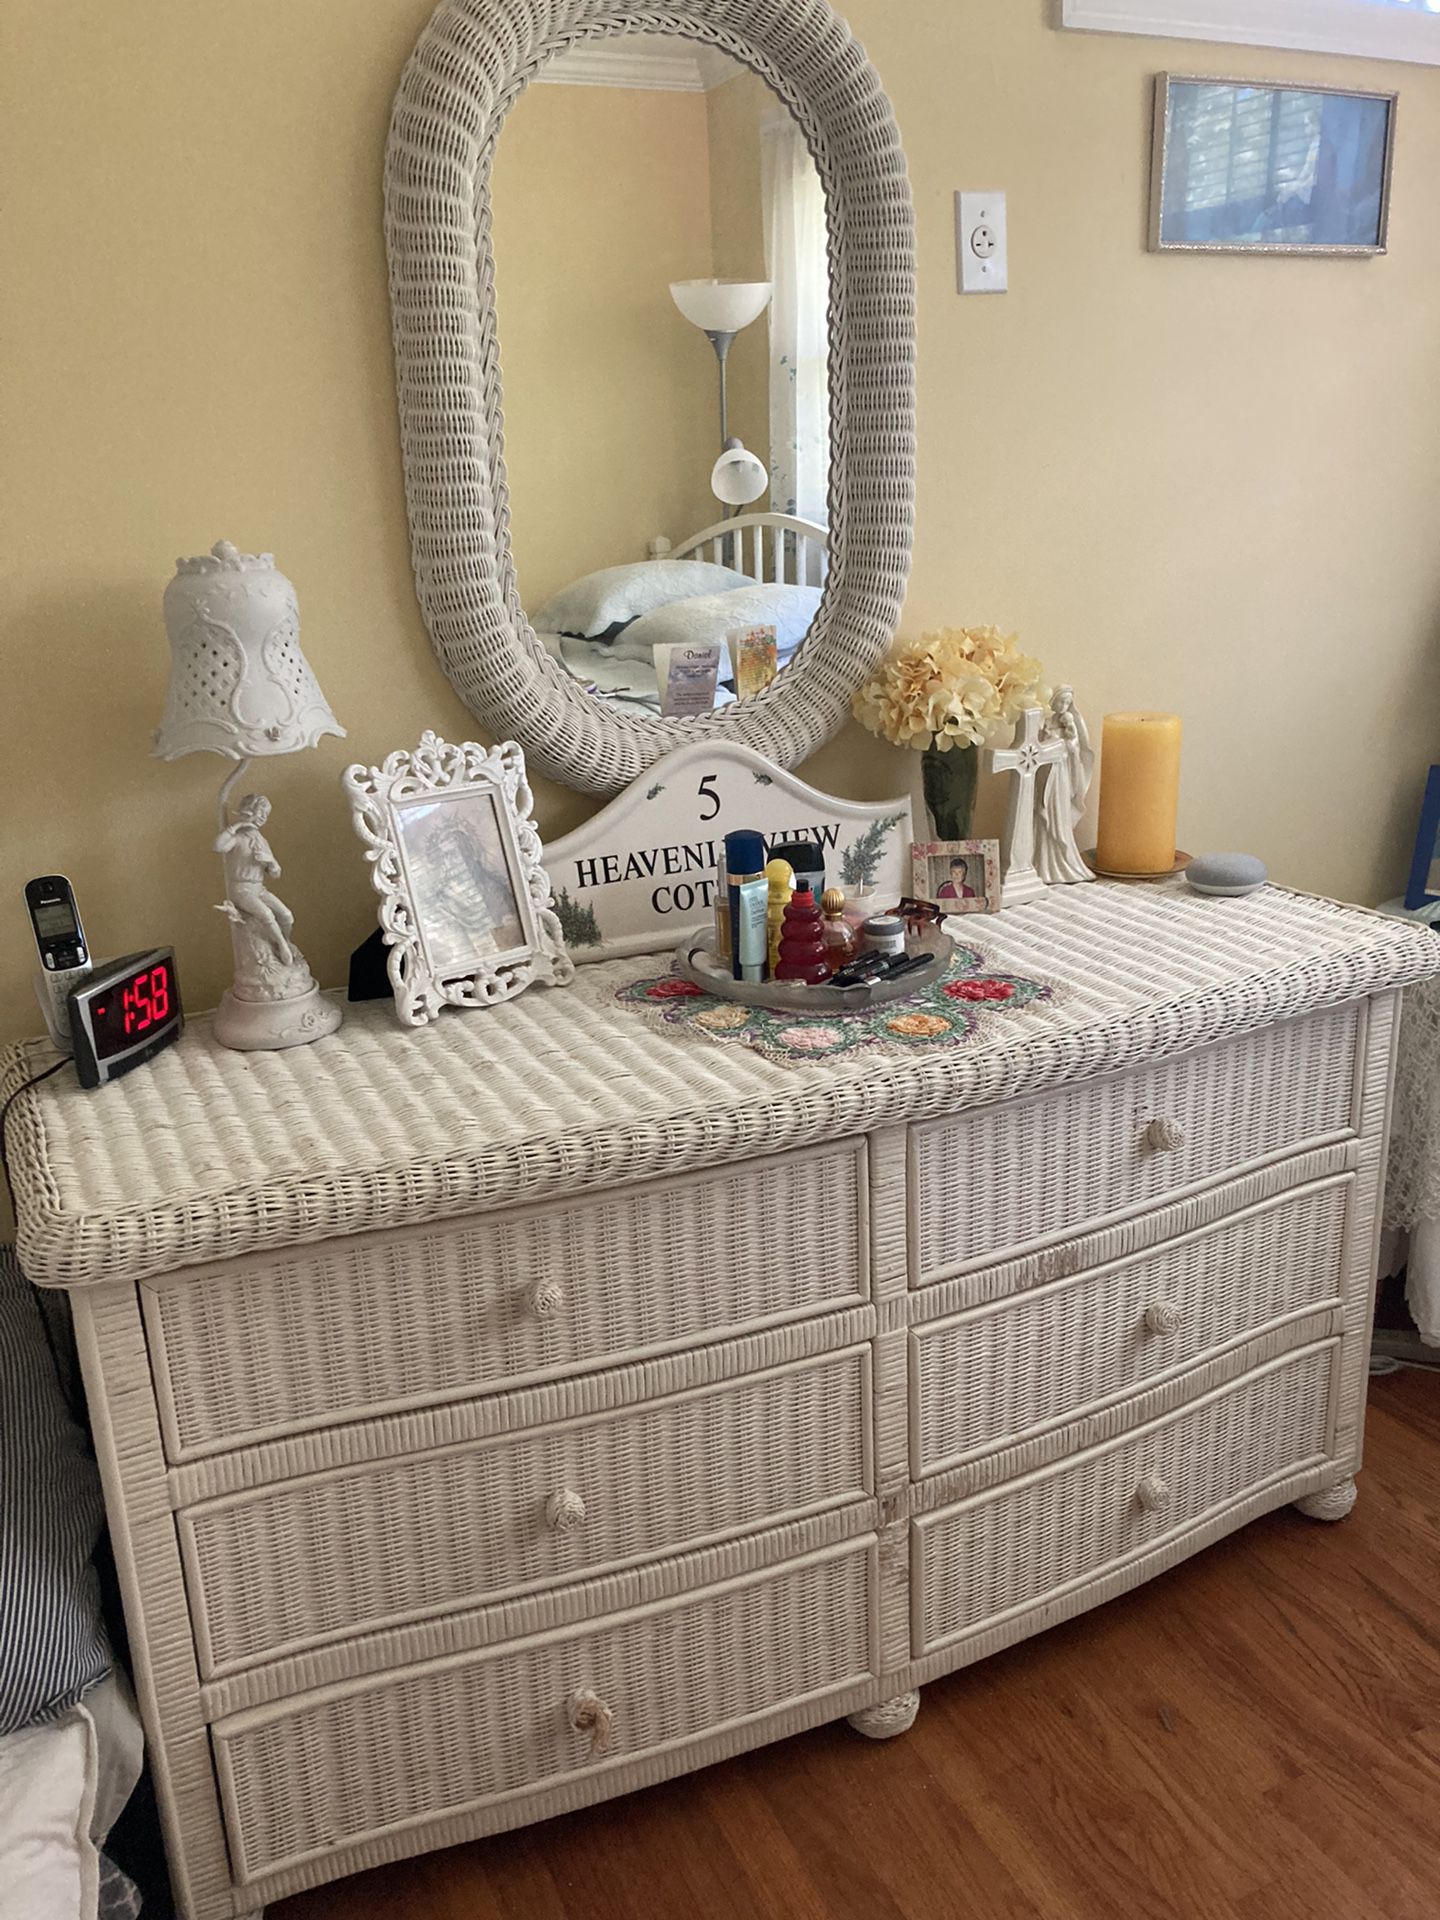 White Wicker Double Dresser, matching Mirror And Lamp 